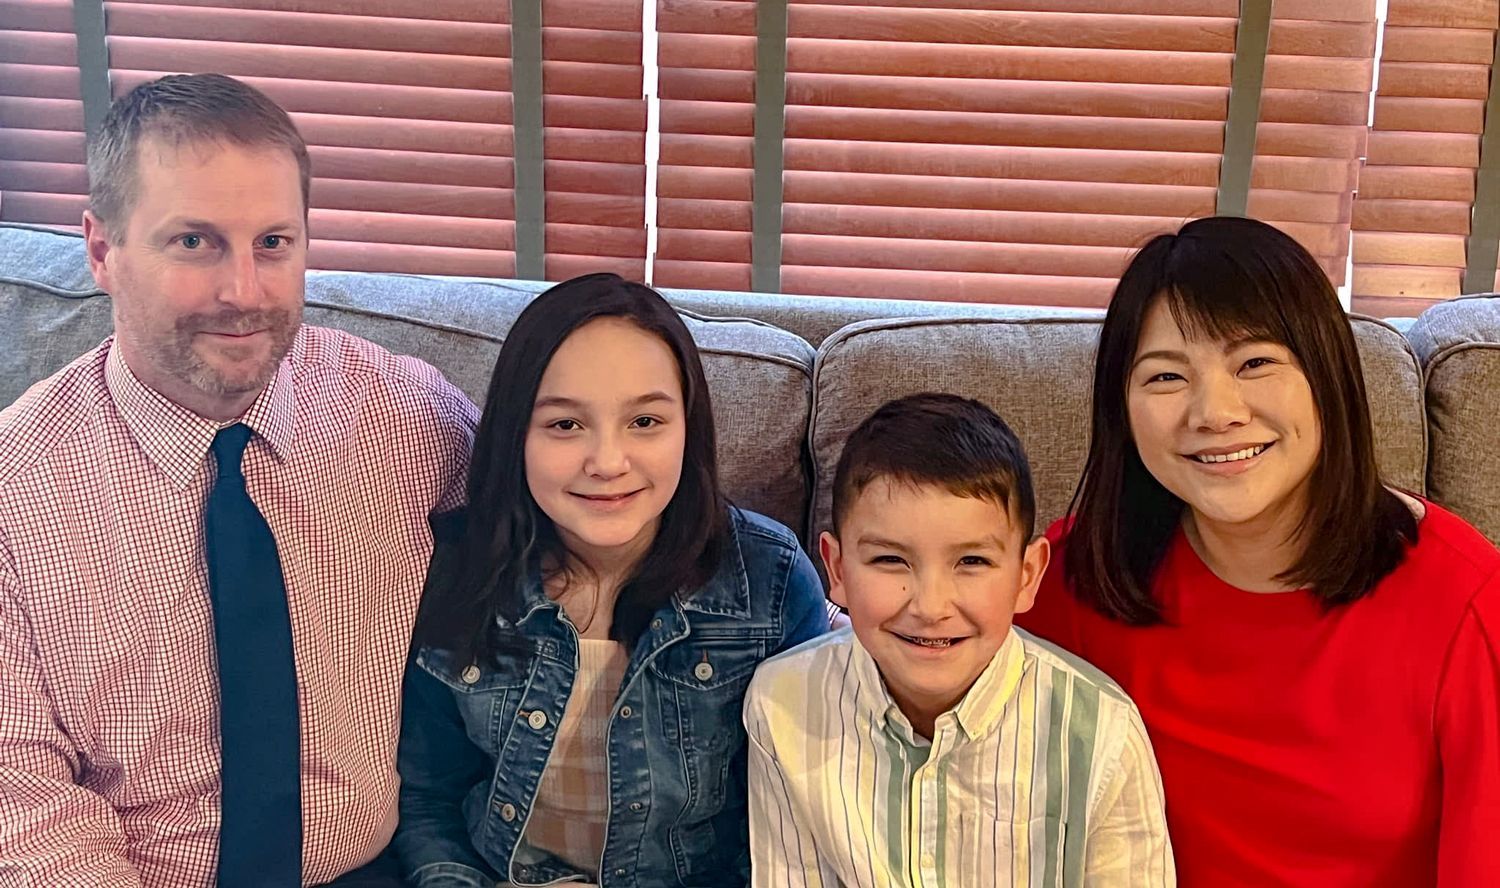 Shawn and his family on a sofa. Shawn is on the left, then his daughter, his son, and his wife